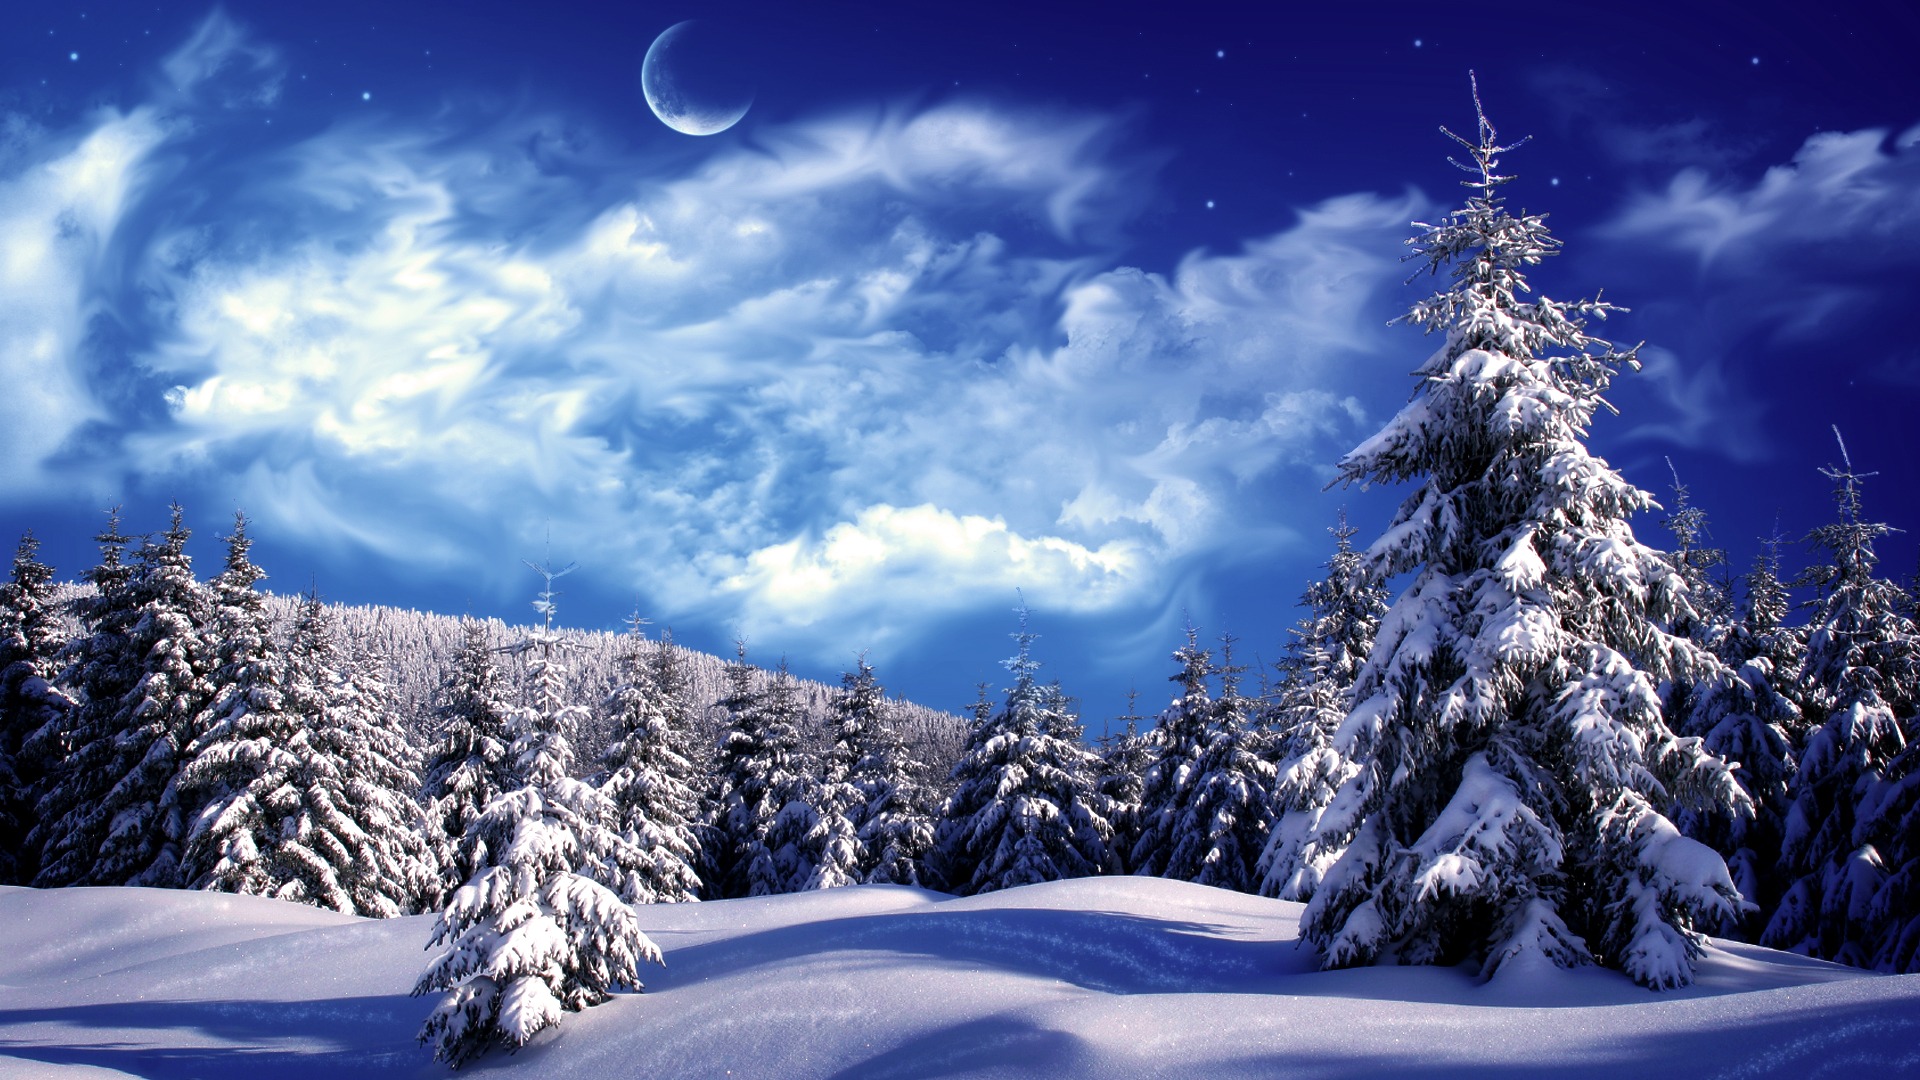 Christmas Winter Scenes Wallpaper Which Is Under The